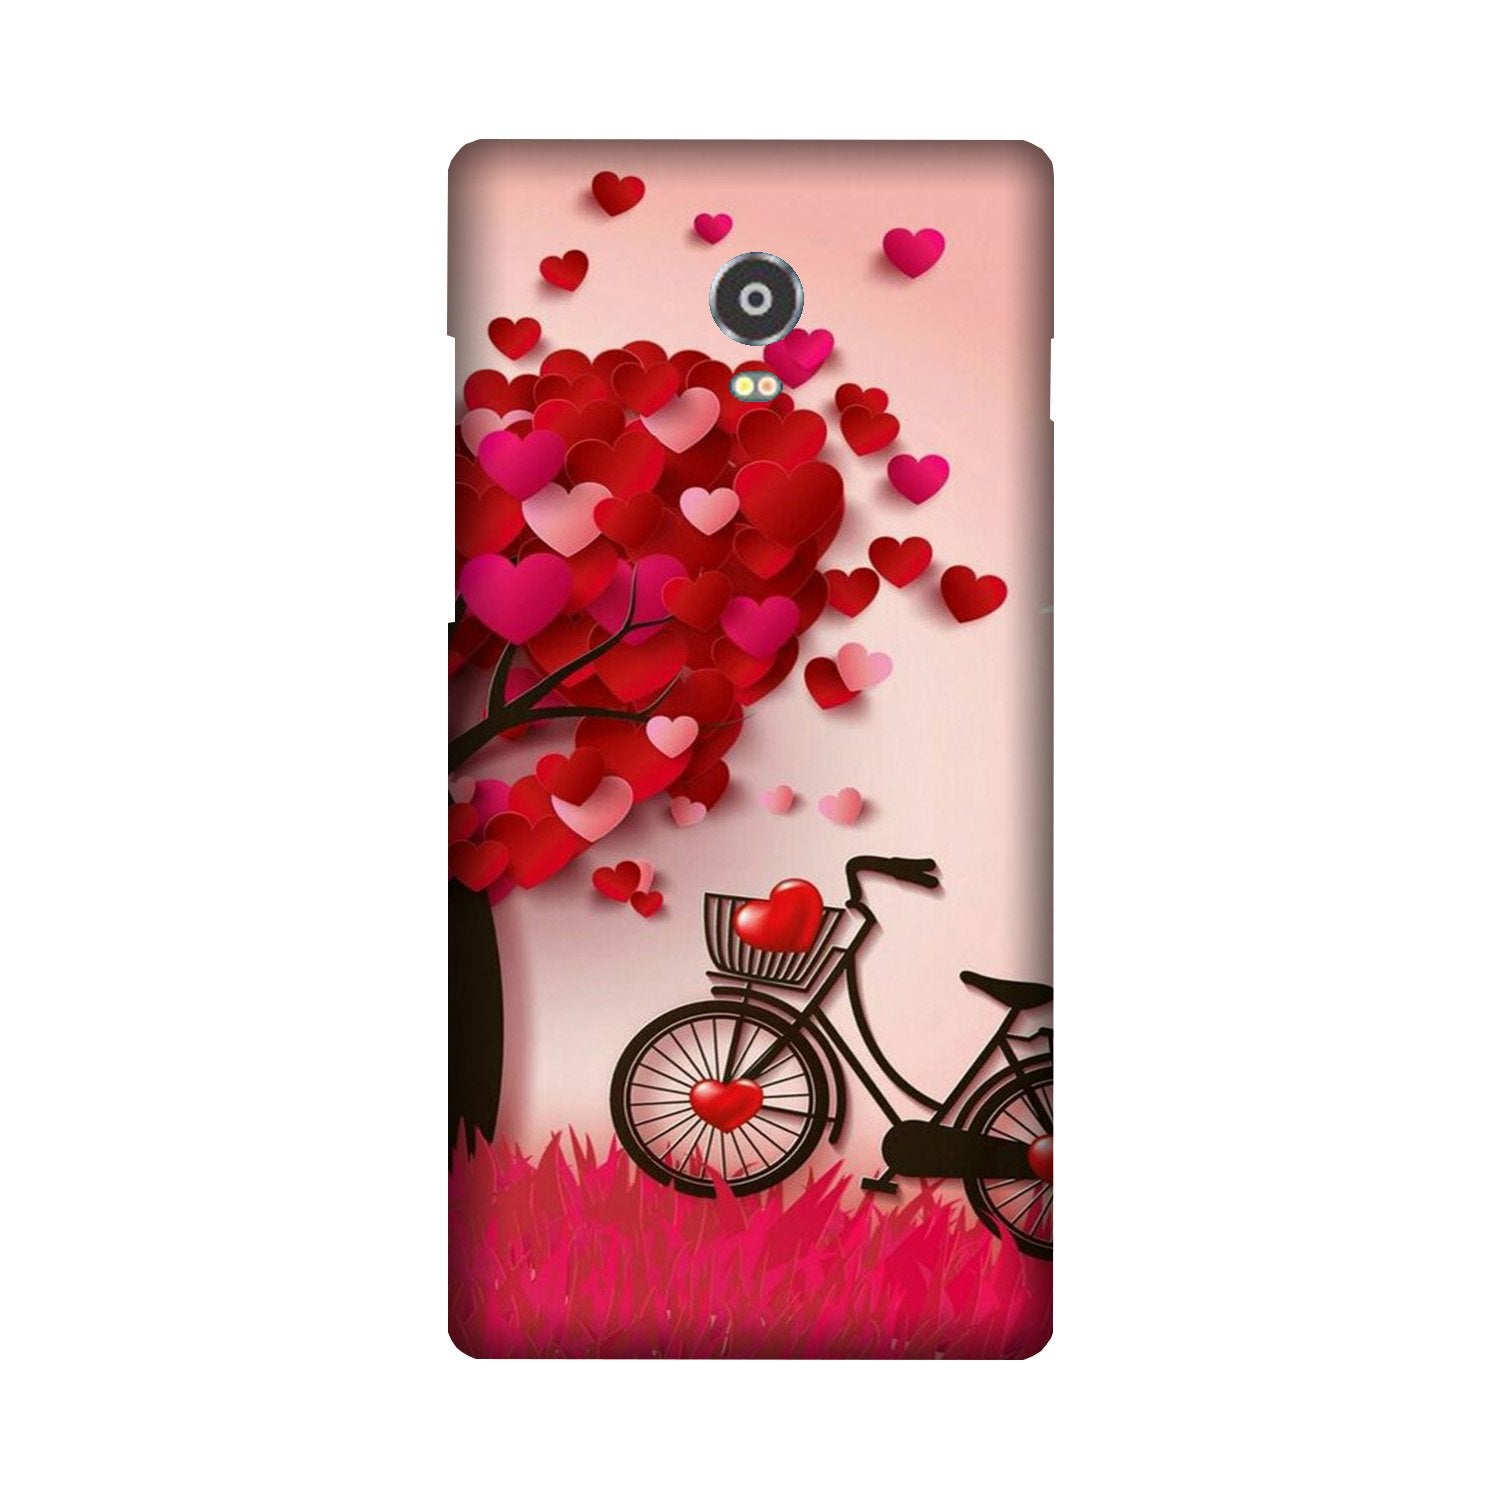 Red Heart Cycle Case for Lenovo Vibe P1 (Design No. 222)